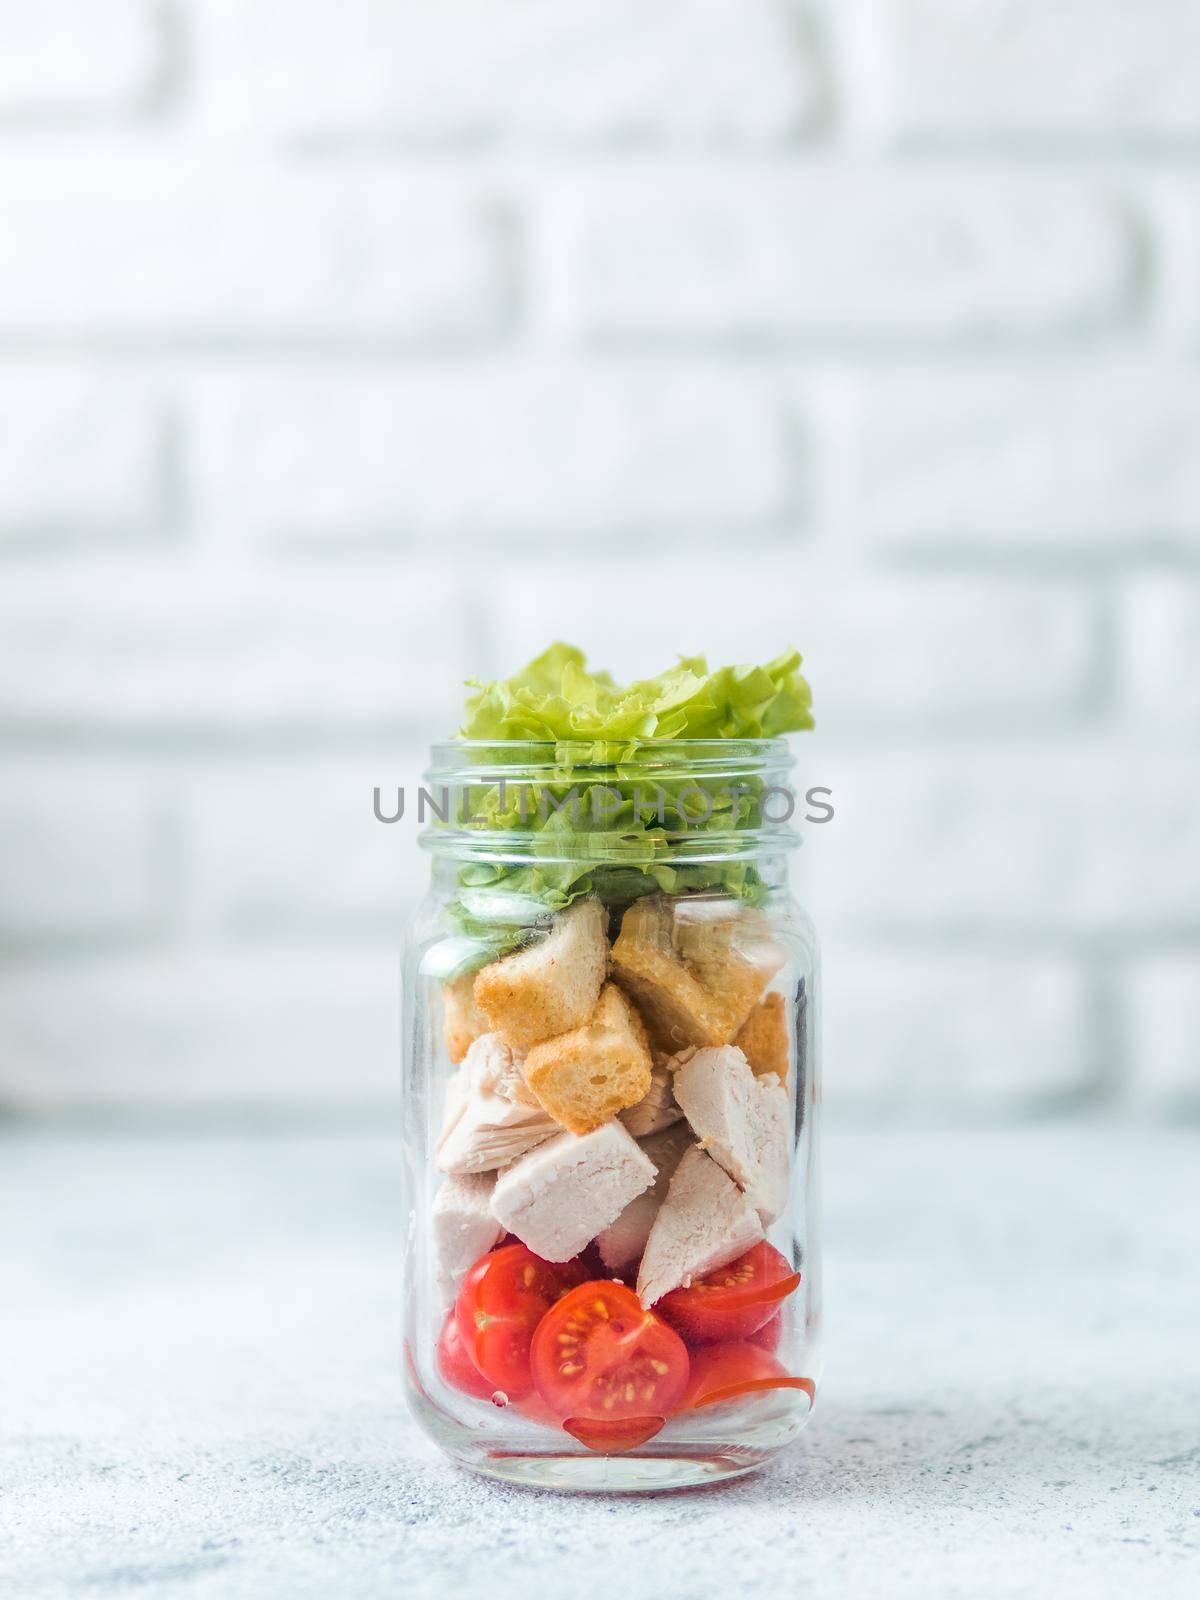 Caesar salad in glass mason jar on gray background. Copy space for text. Homemade healthy caesar salad layered in jar. Healthy food, trendy modern food, diet concept, idea, recipe. Vertical.